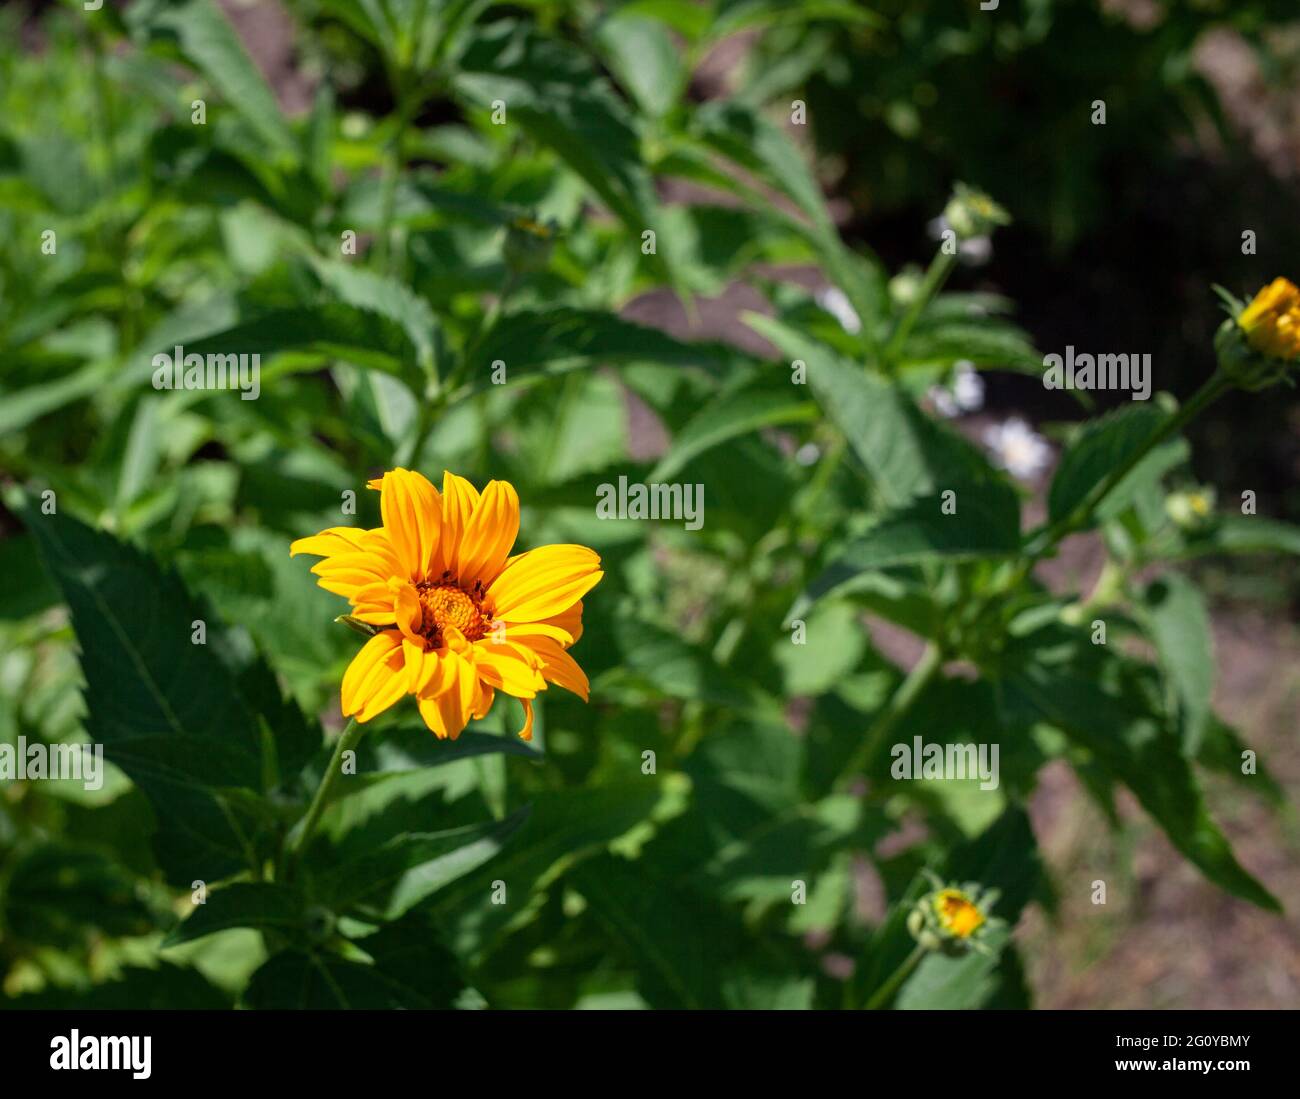 Bright yellow heliopsis flowers on a green background. False sunflower. Close-up photo of yellow blossom flower on green stem Stock Photo